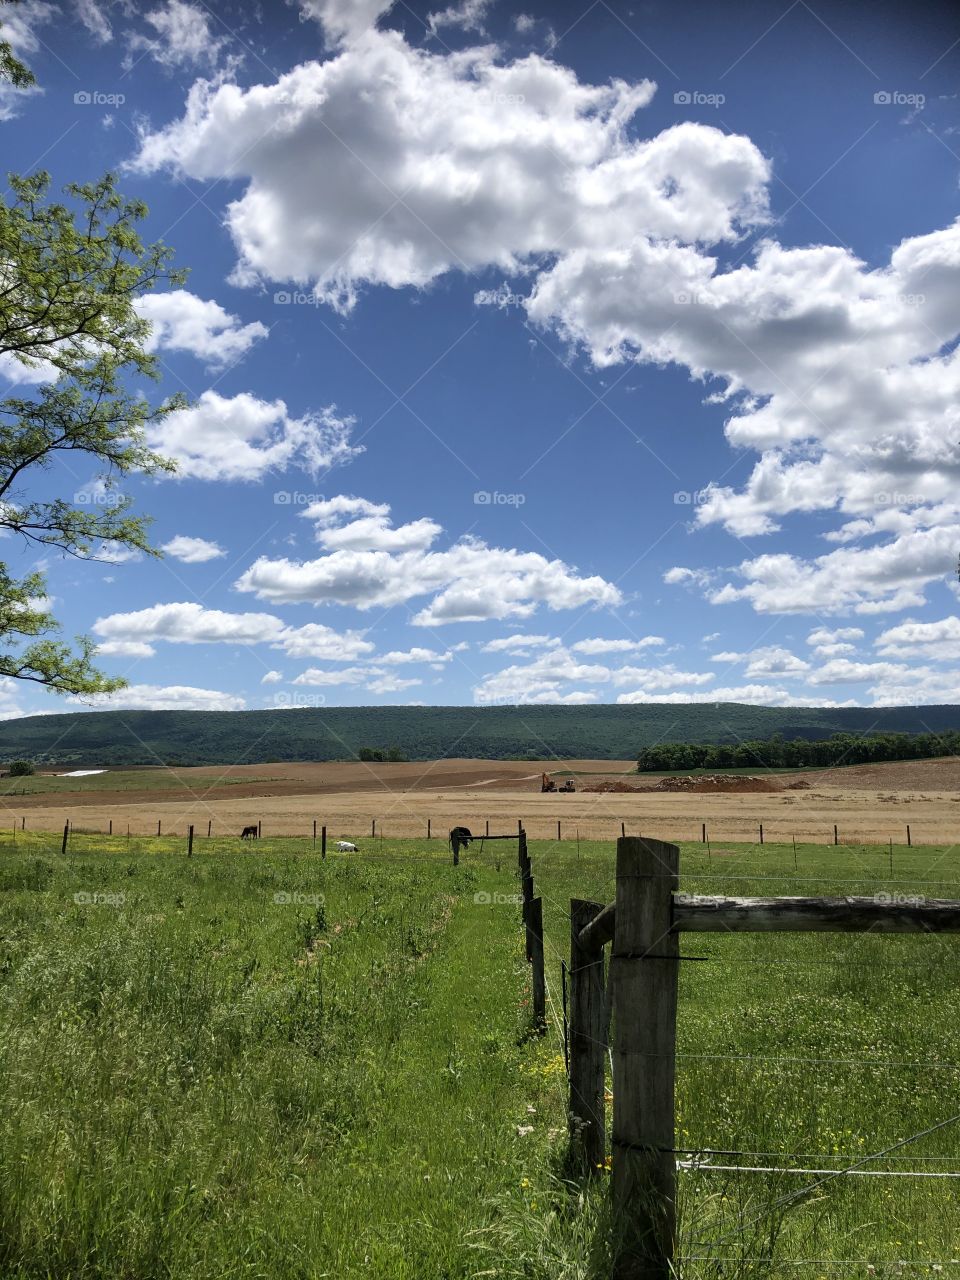 Cattle farm rural Maryland beautiful sky spring day 